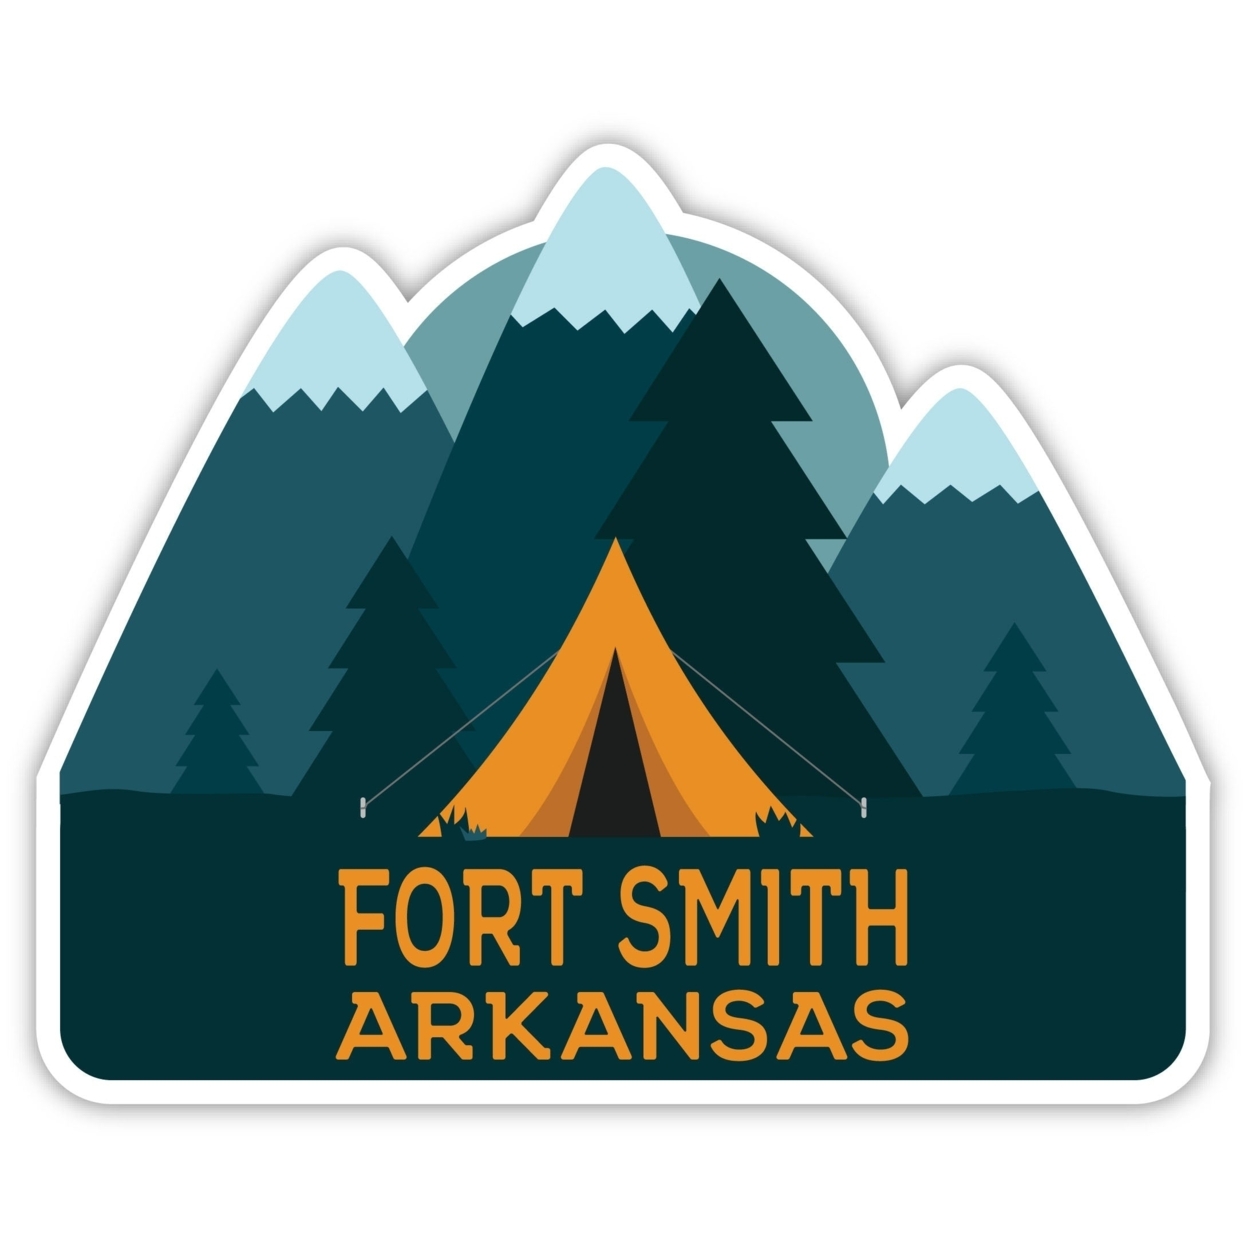 Fort Smith Arkansas Souvenir Decorative Stickers (Choose Theme And Size) - 4-Pack, 4-Inch, Tent